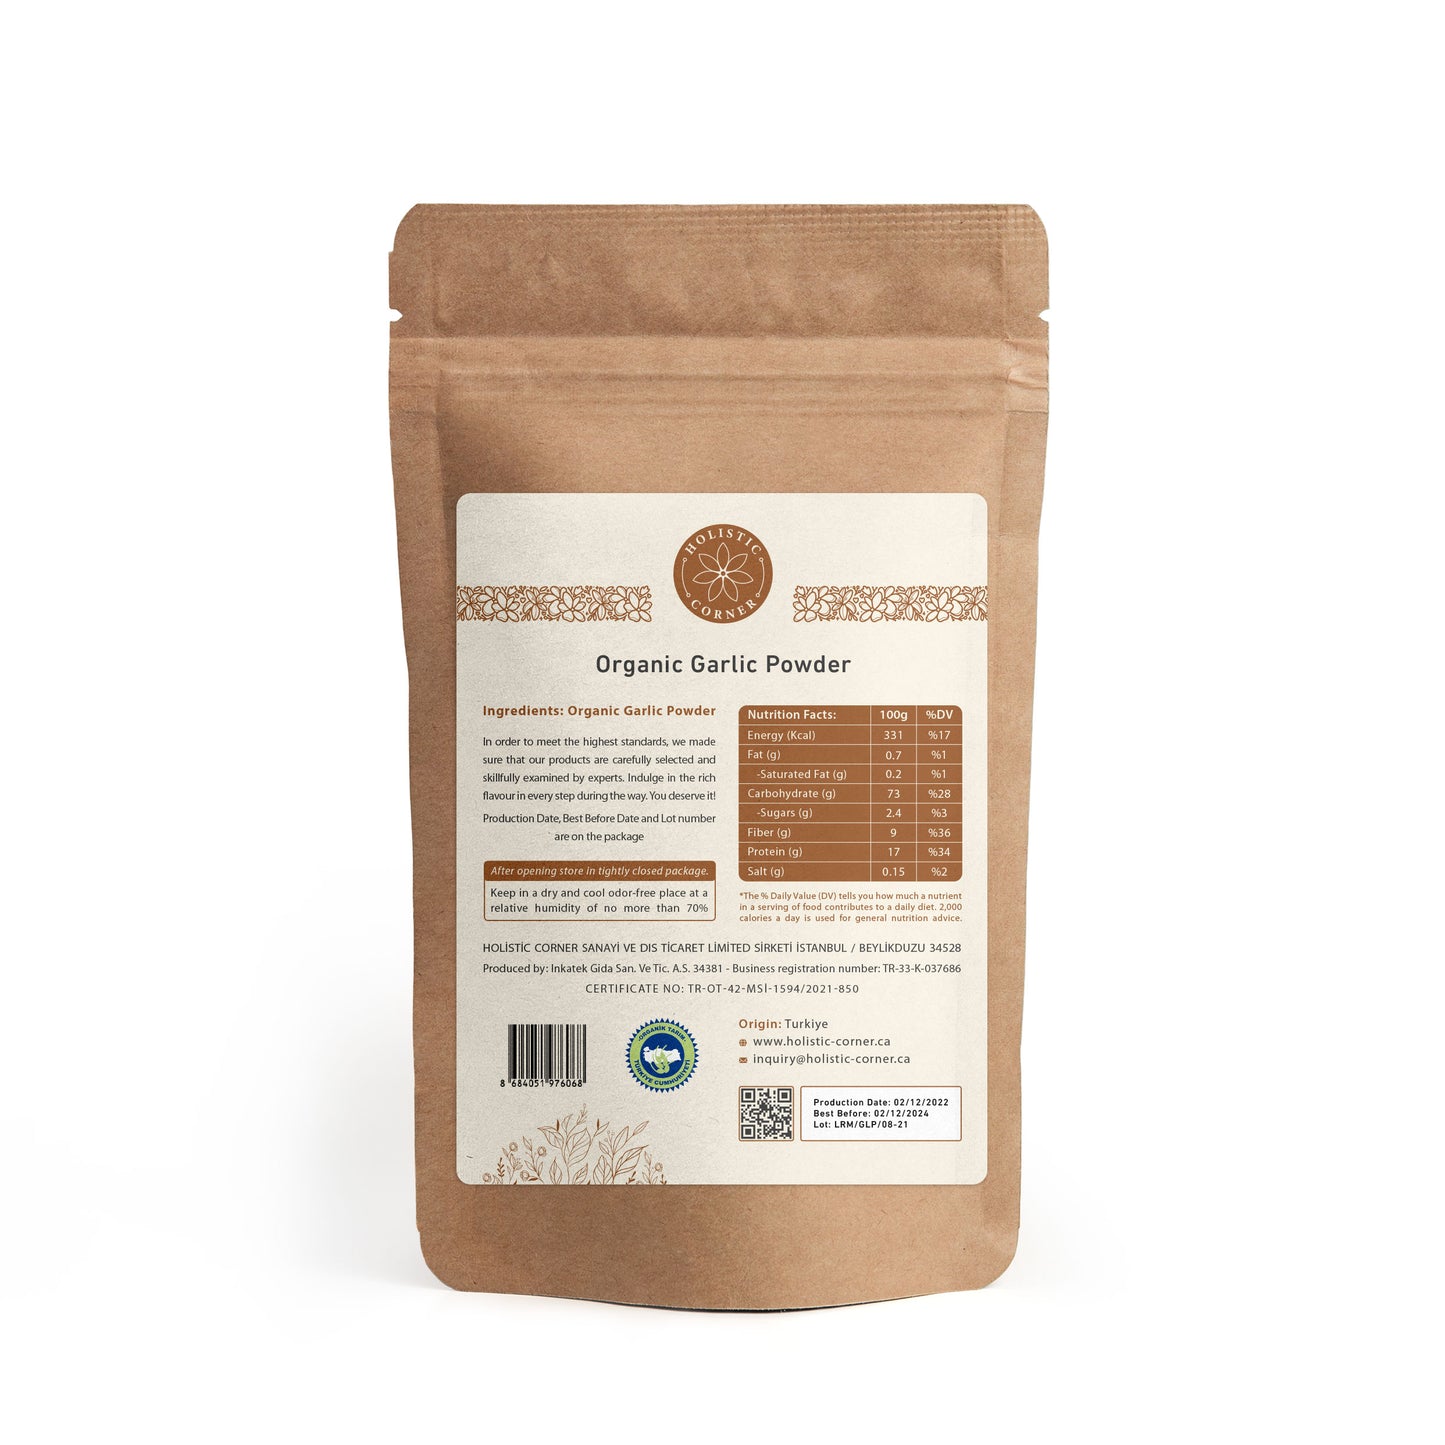 A versatile and aromatic addition to your culinary creations, this organic garlic powder comes in a convenient 0.19 lb package.